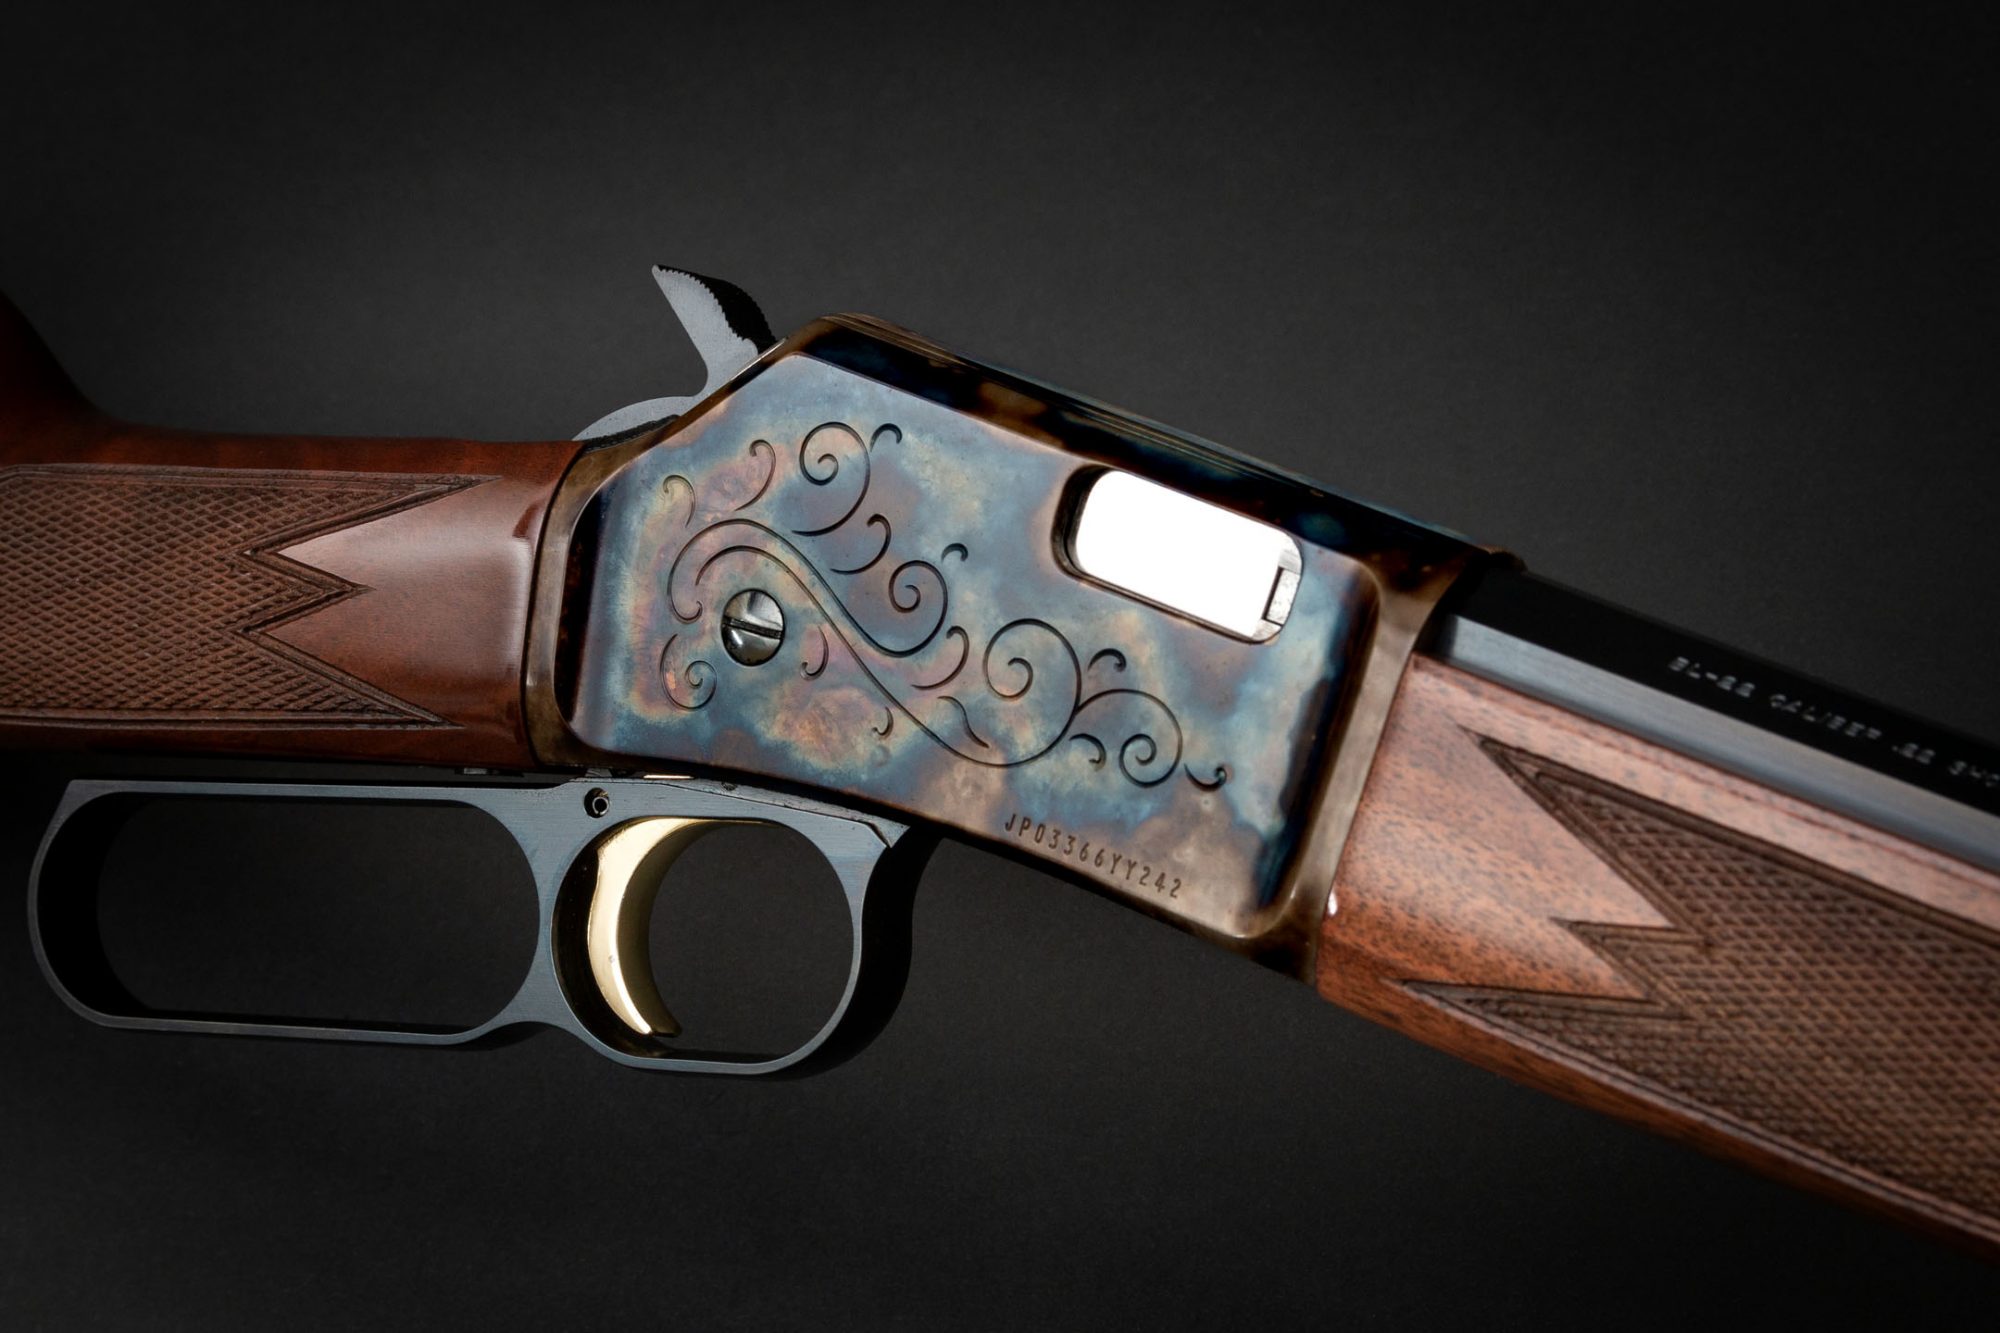 Browning BL-22 Grade II Octagon, hand-engraved and case-colored by Turnbull Restoration Co.